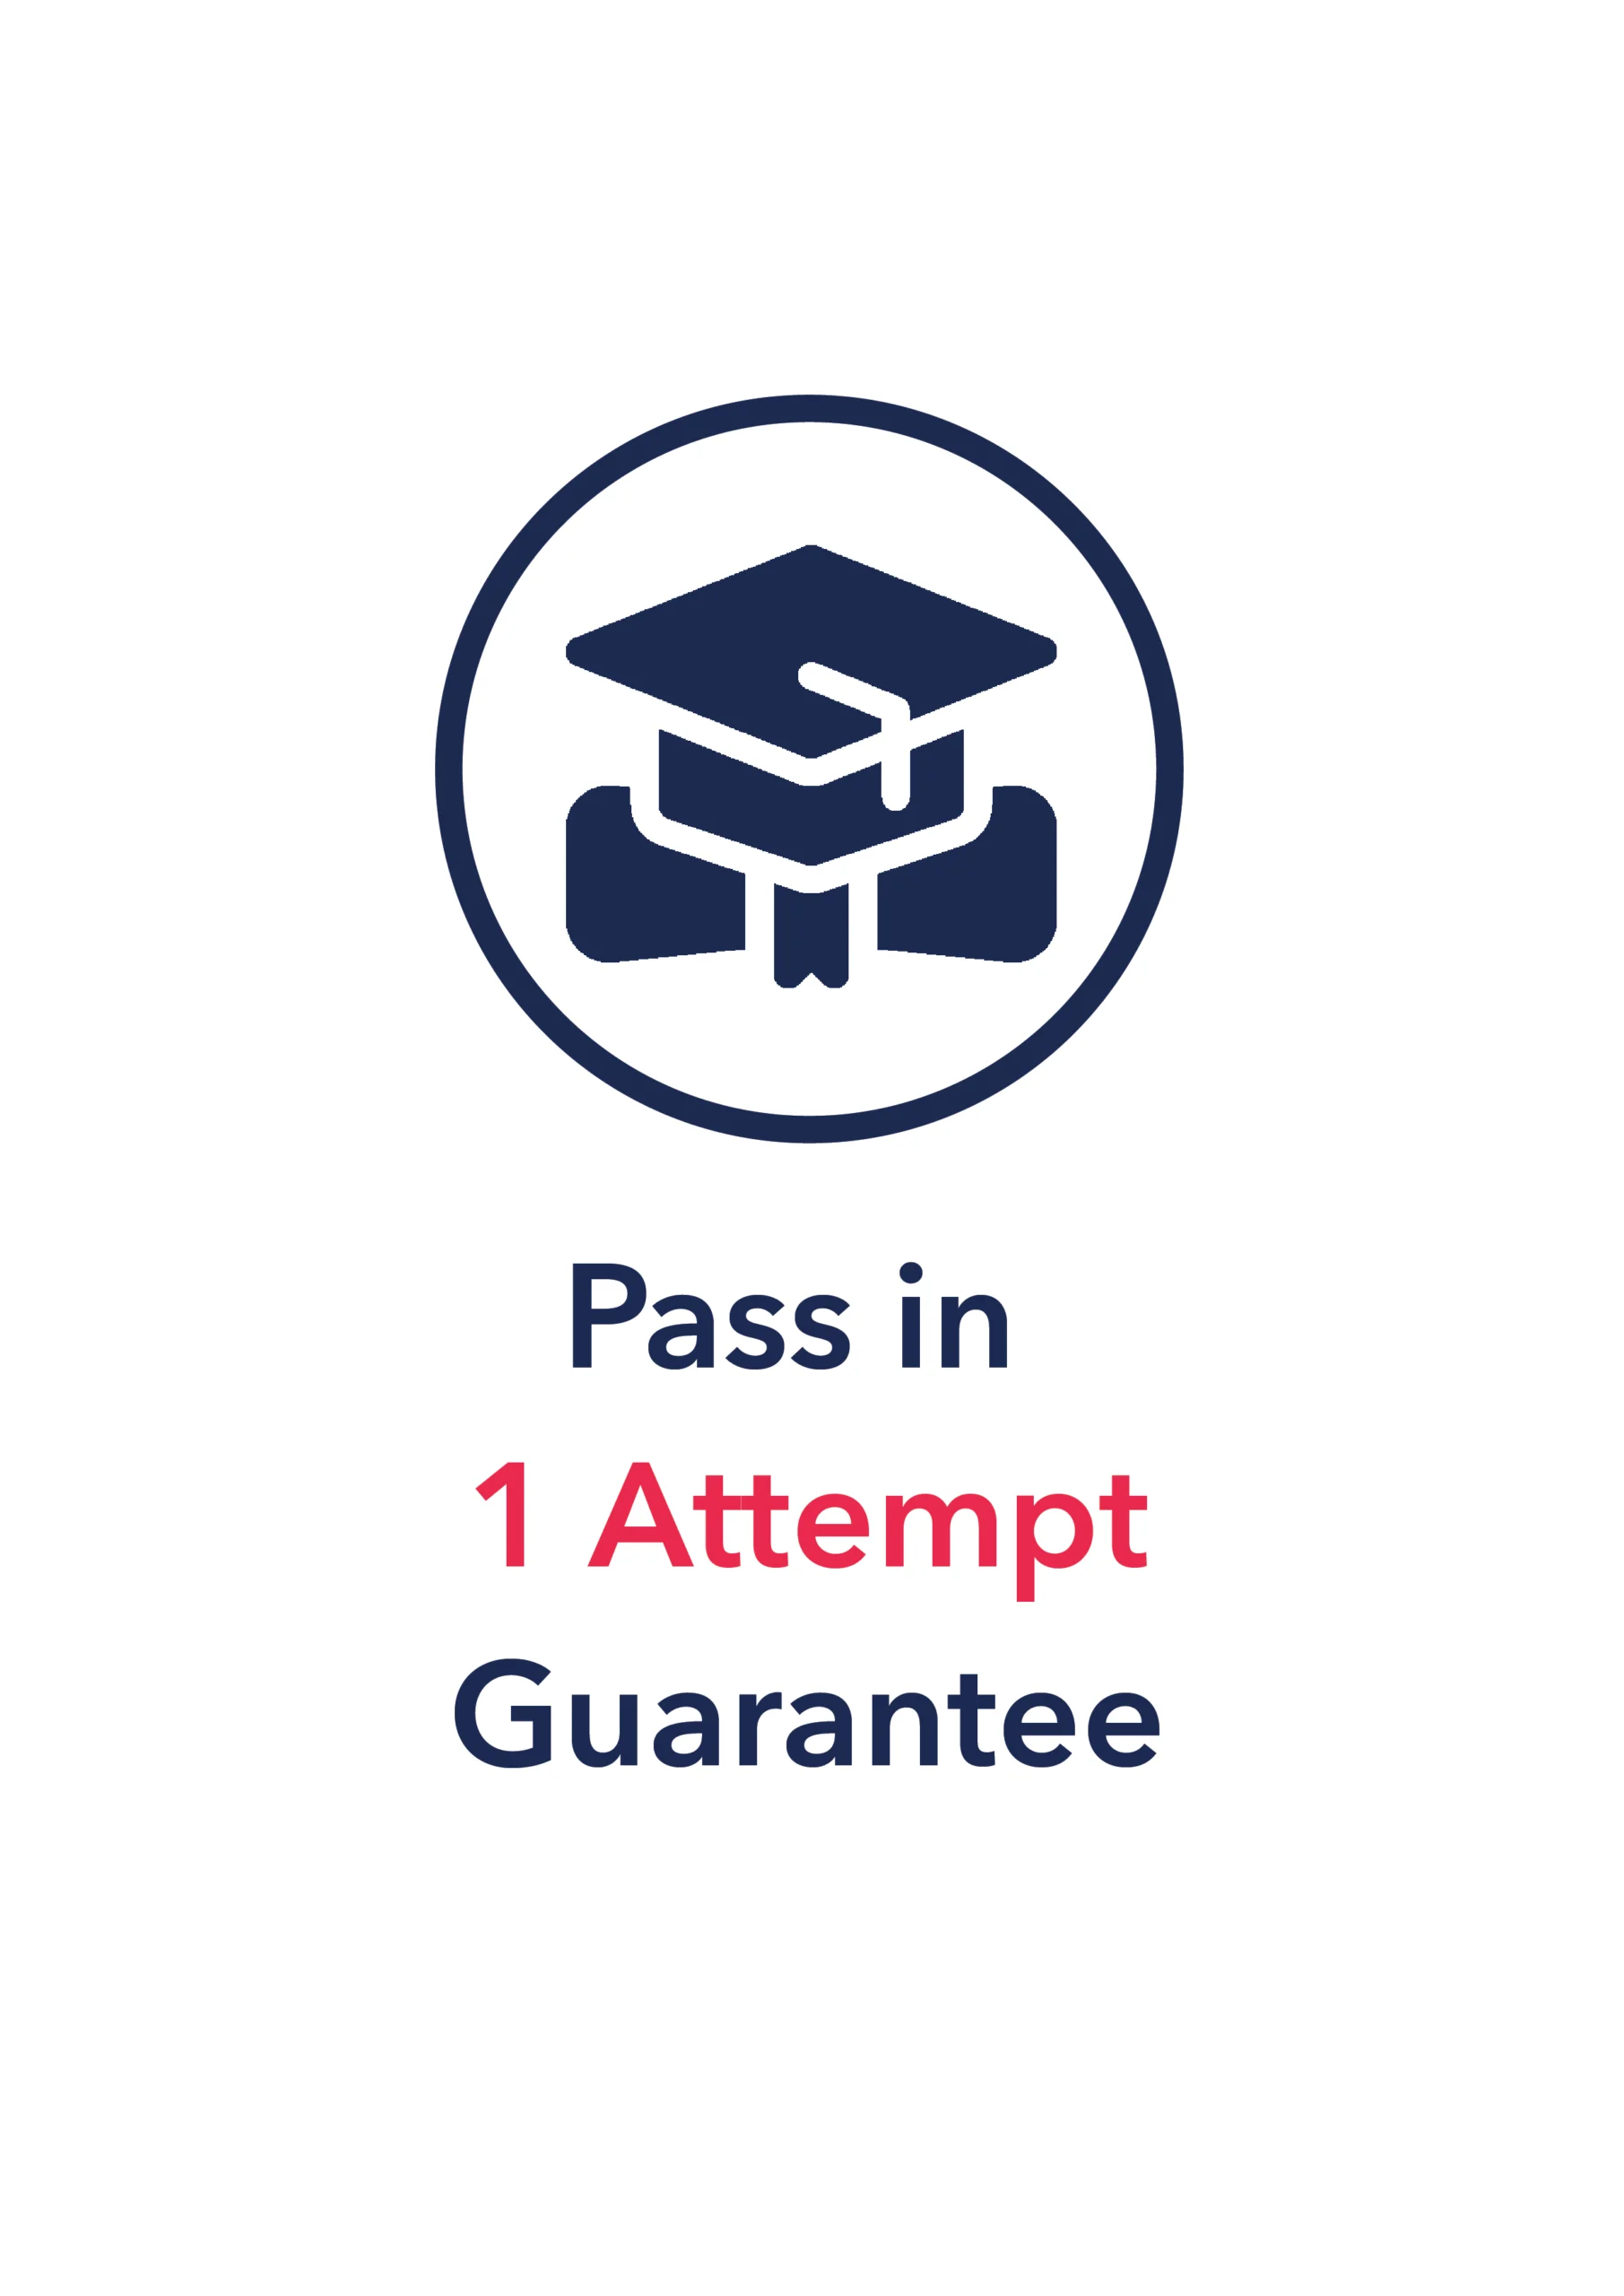 Pass in 1 Attempt Guarantee